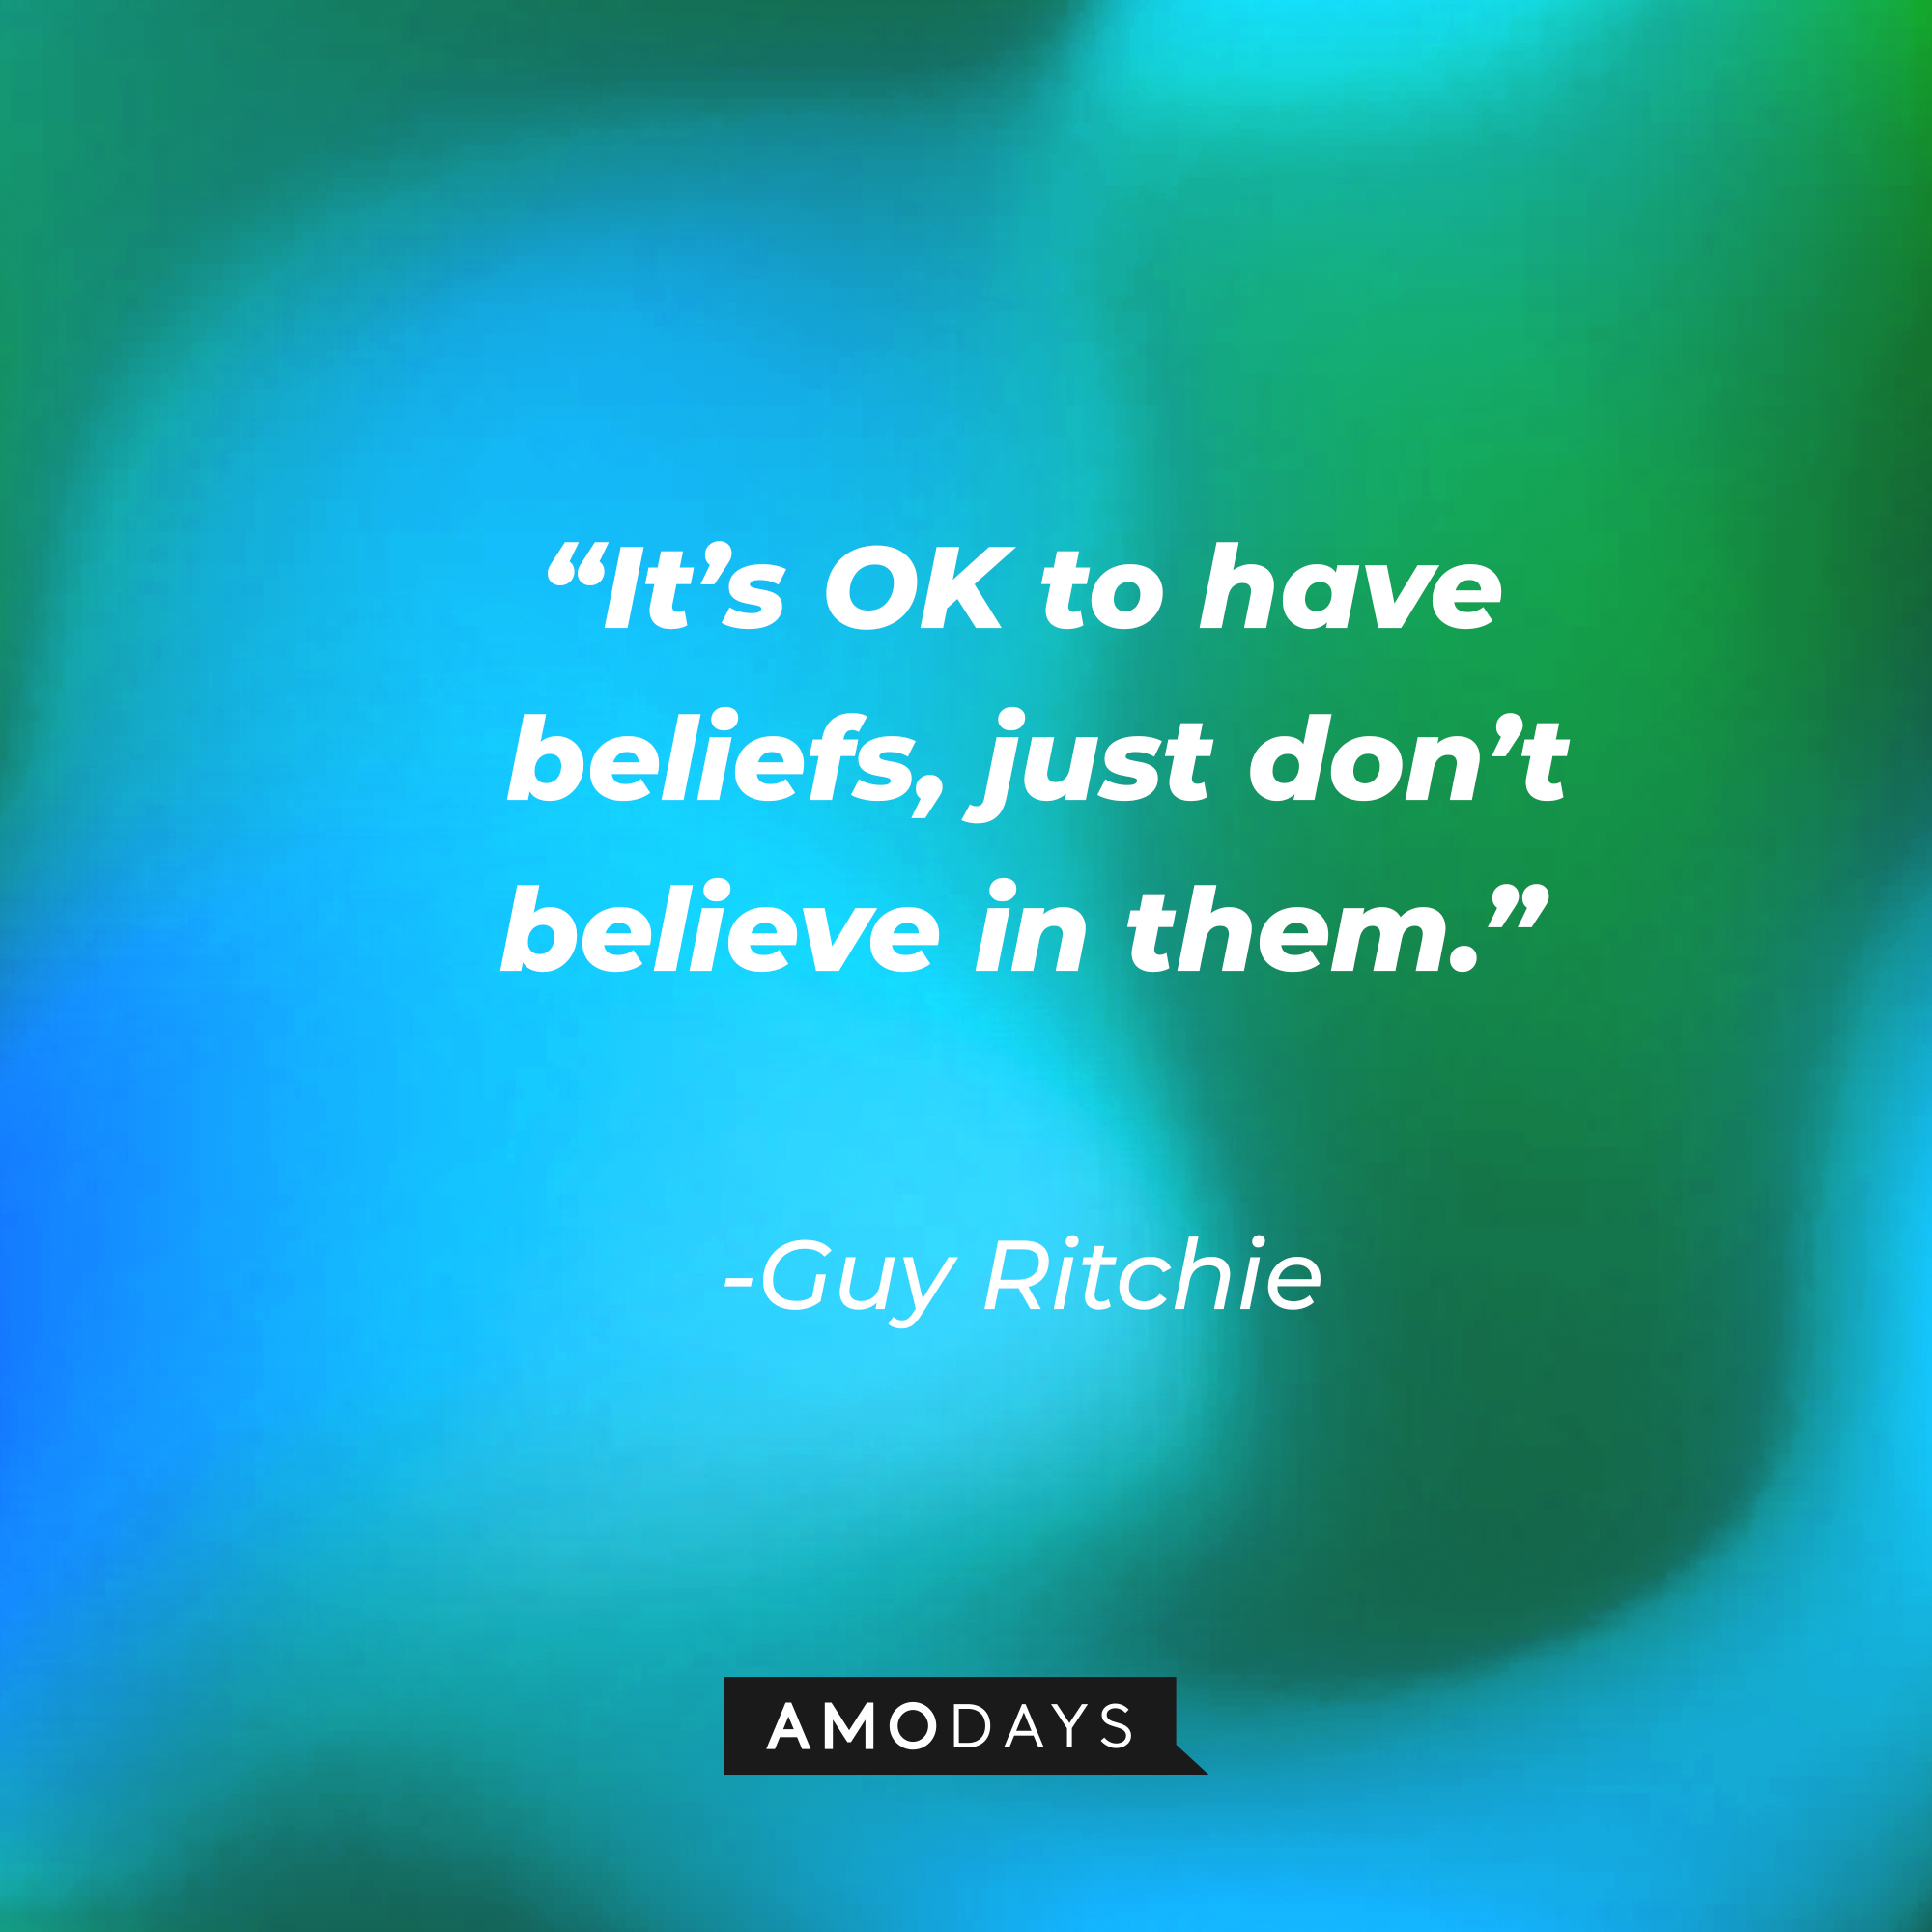 Guy Ritchie's quote, “It’s OK to have beliefs, just don’t believe in them.” | Source: AmoDays